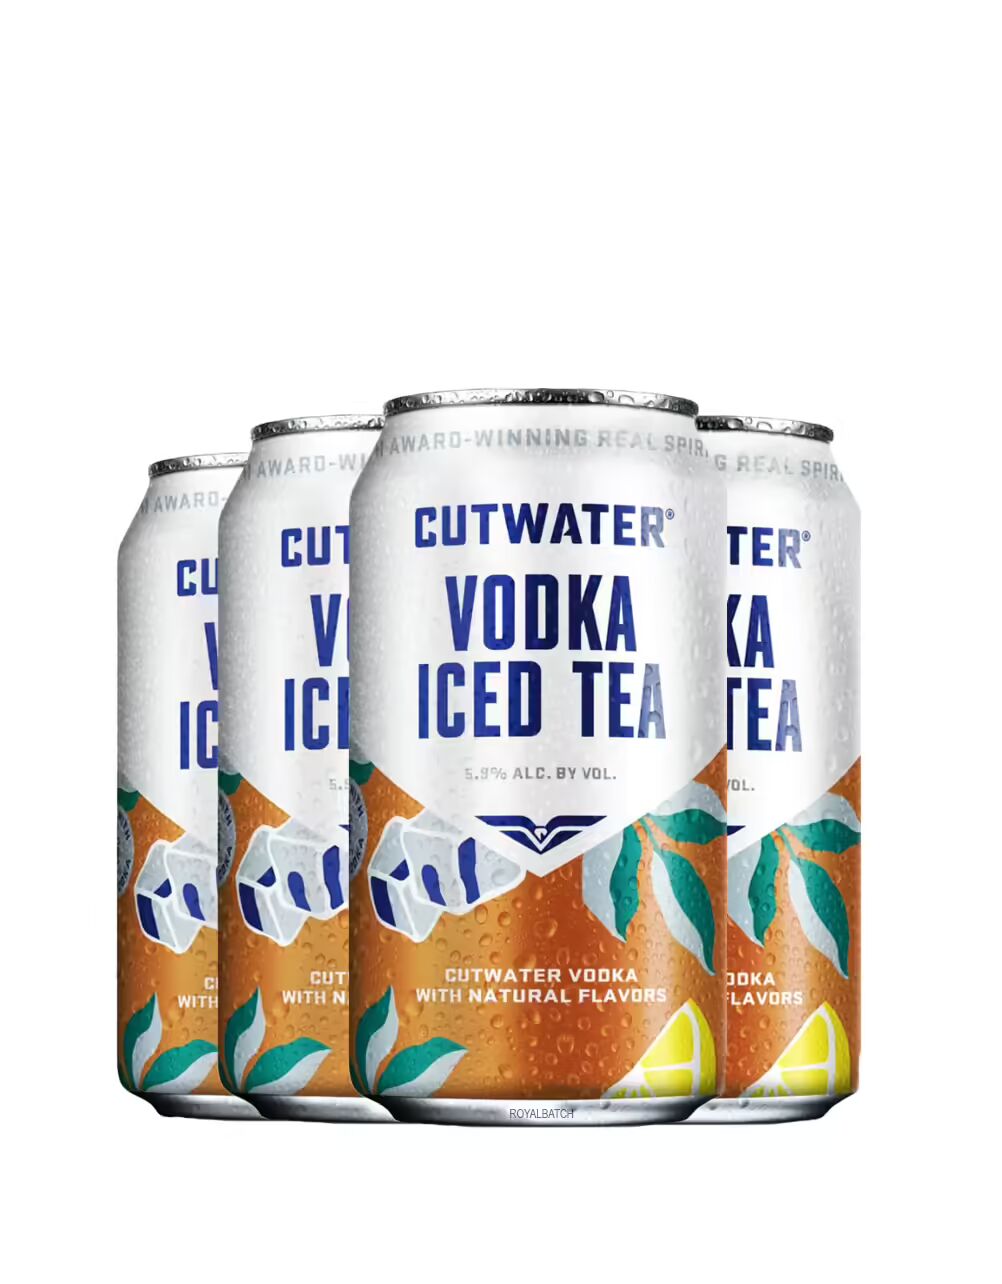 Cutwater Vodka Iced Tea Canned Cocktails (4 Pack) 355ml